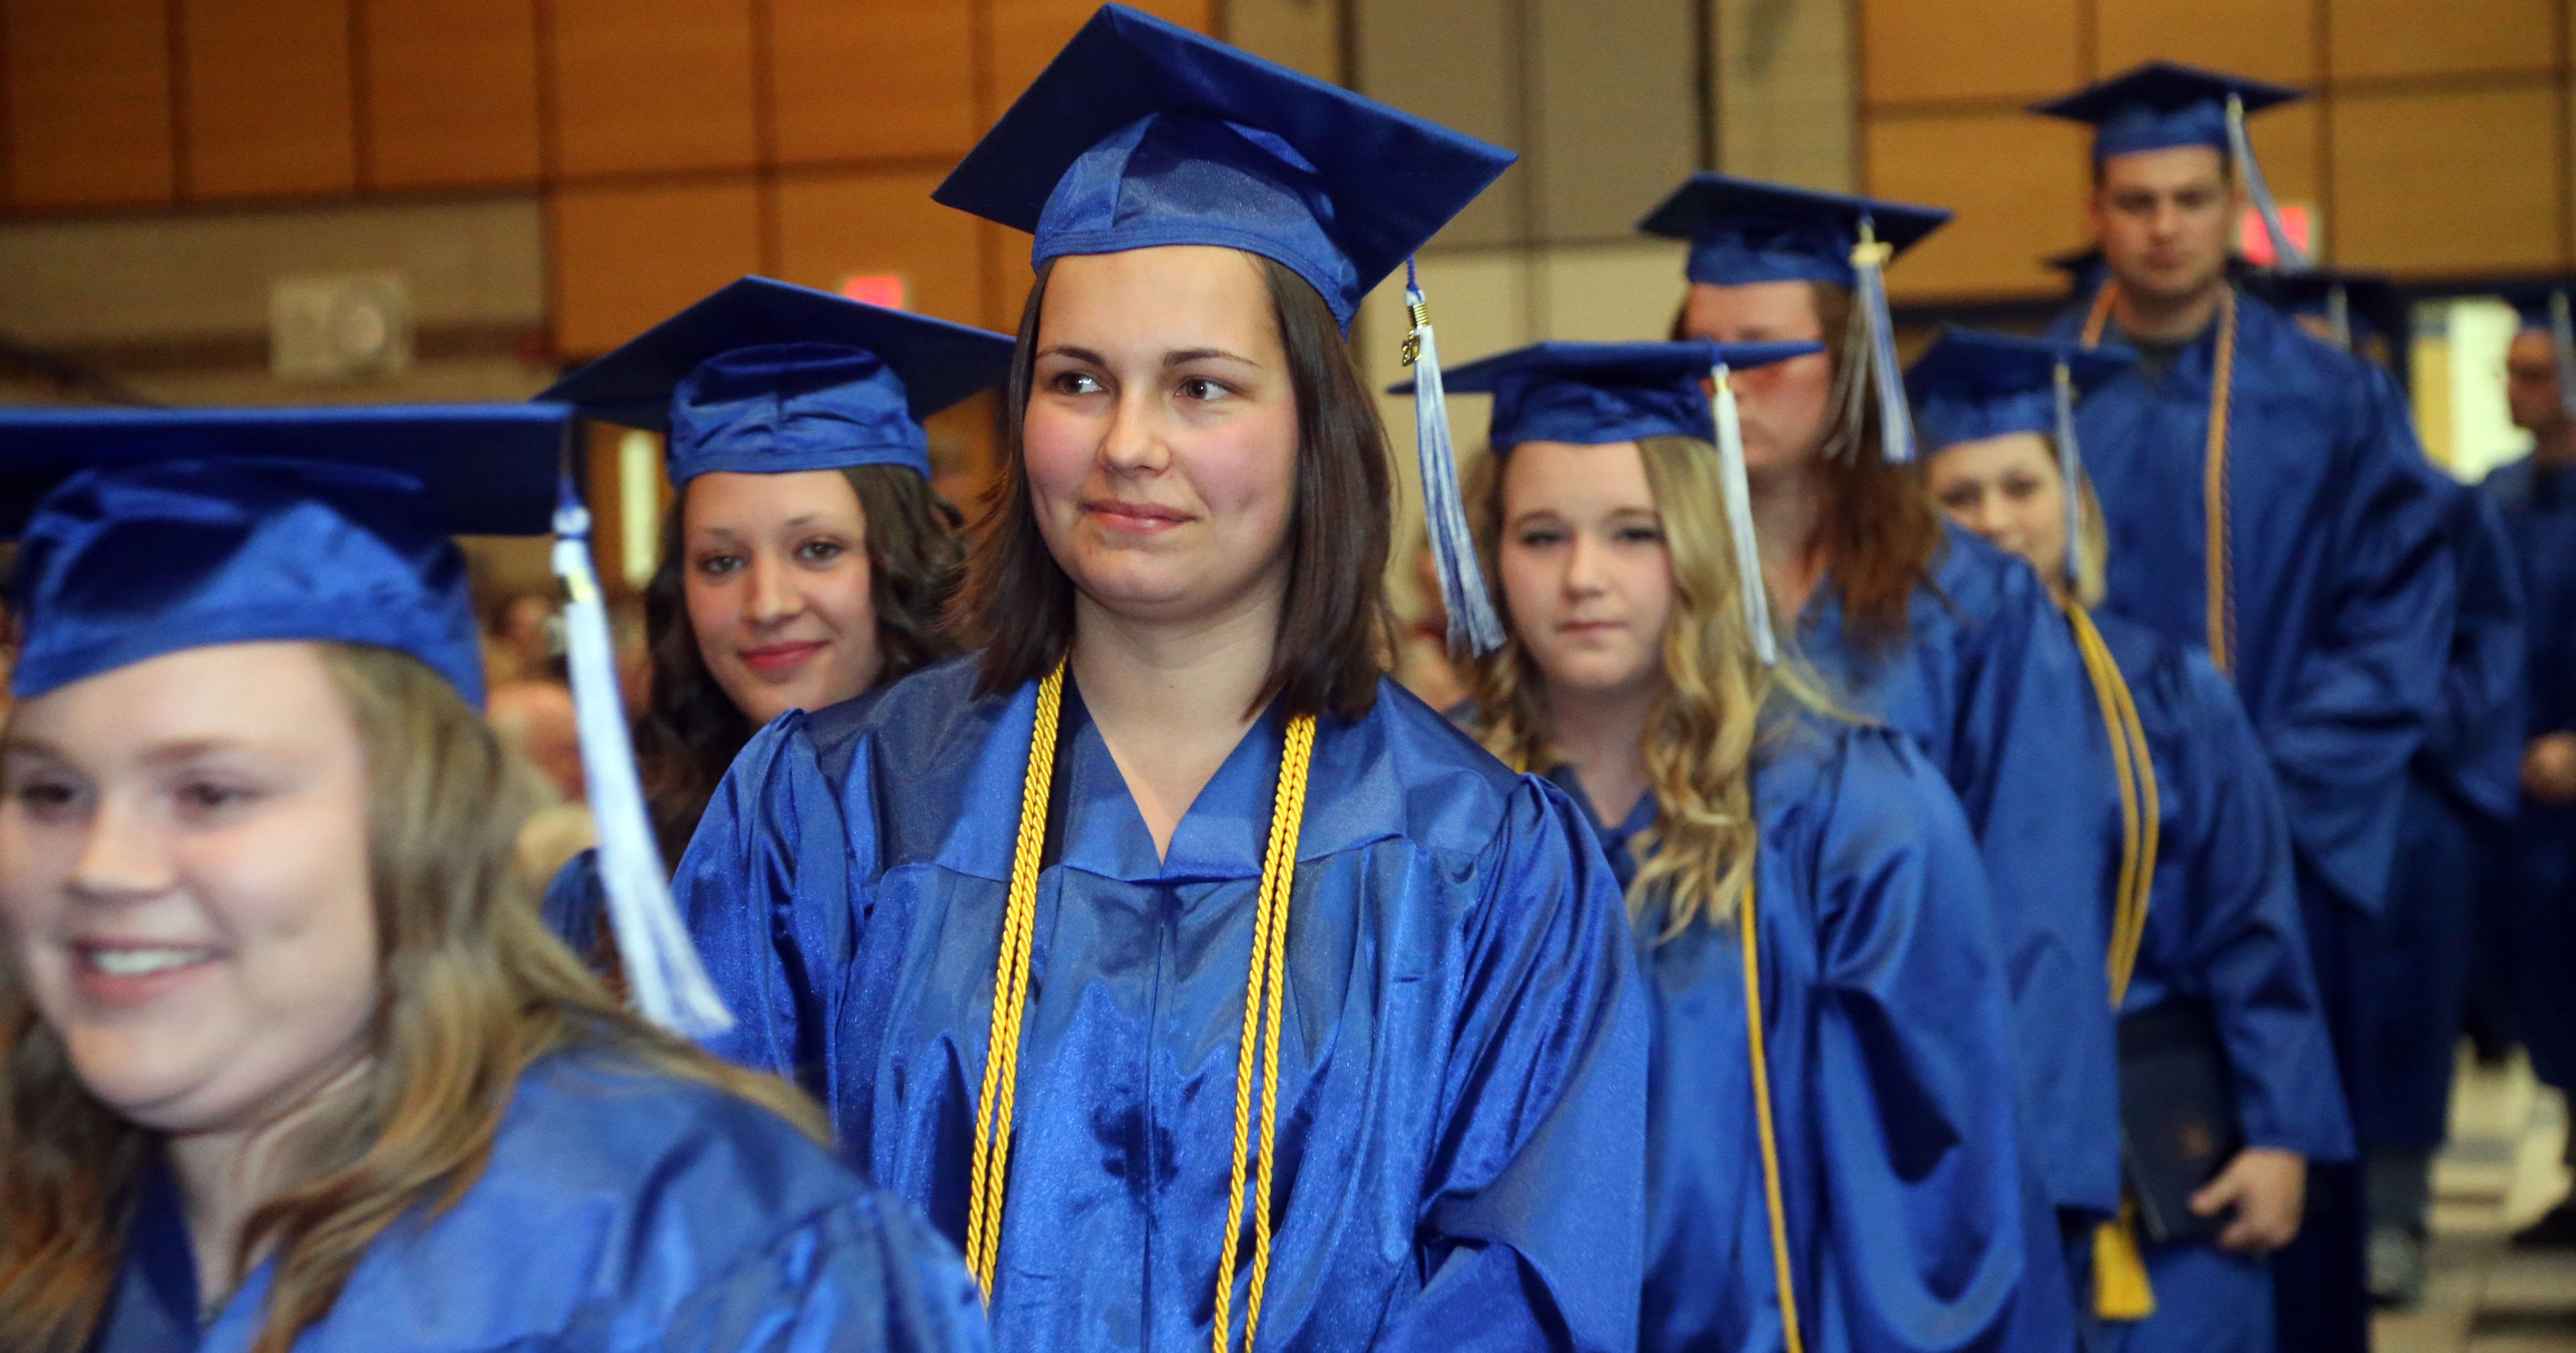 WITC students dressed in blue caps and gowns with yellow tassels walking in a line at graduation.